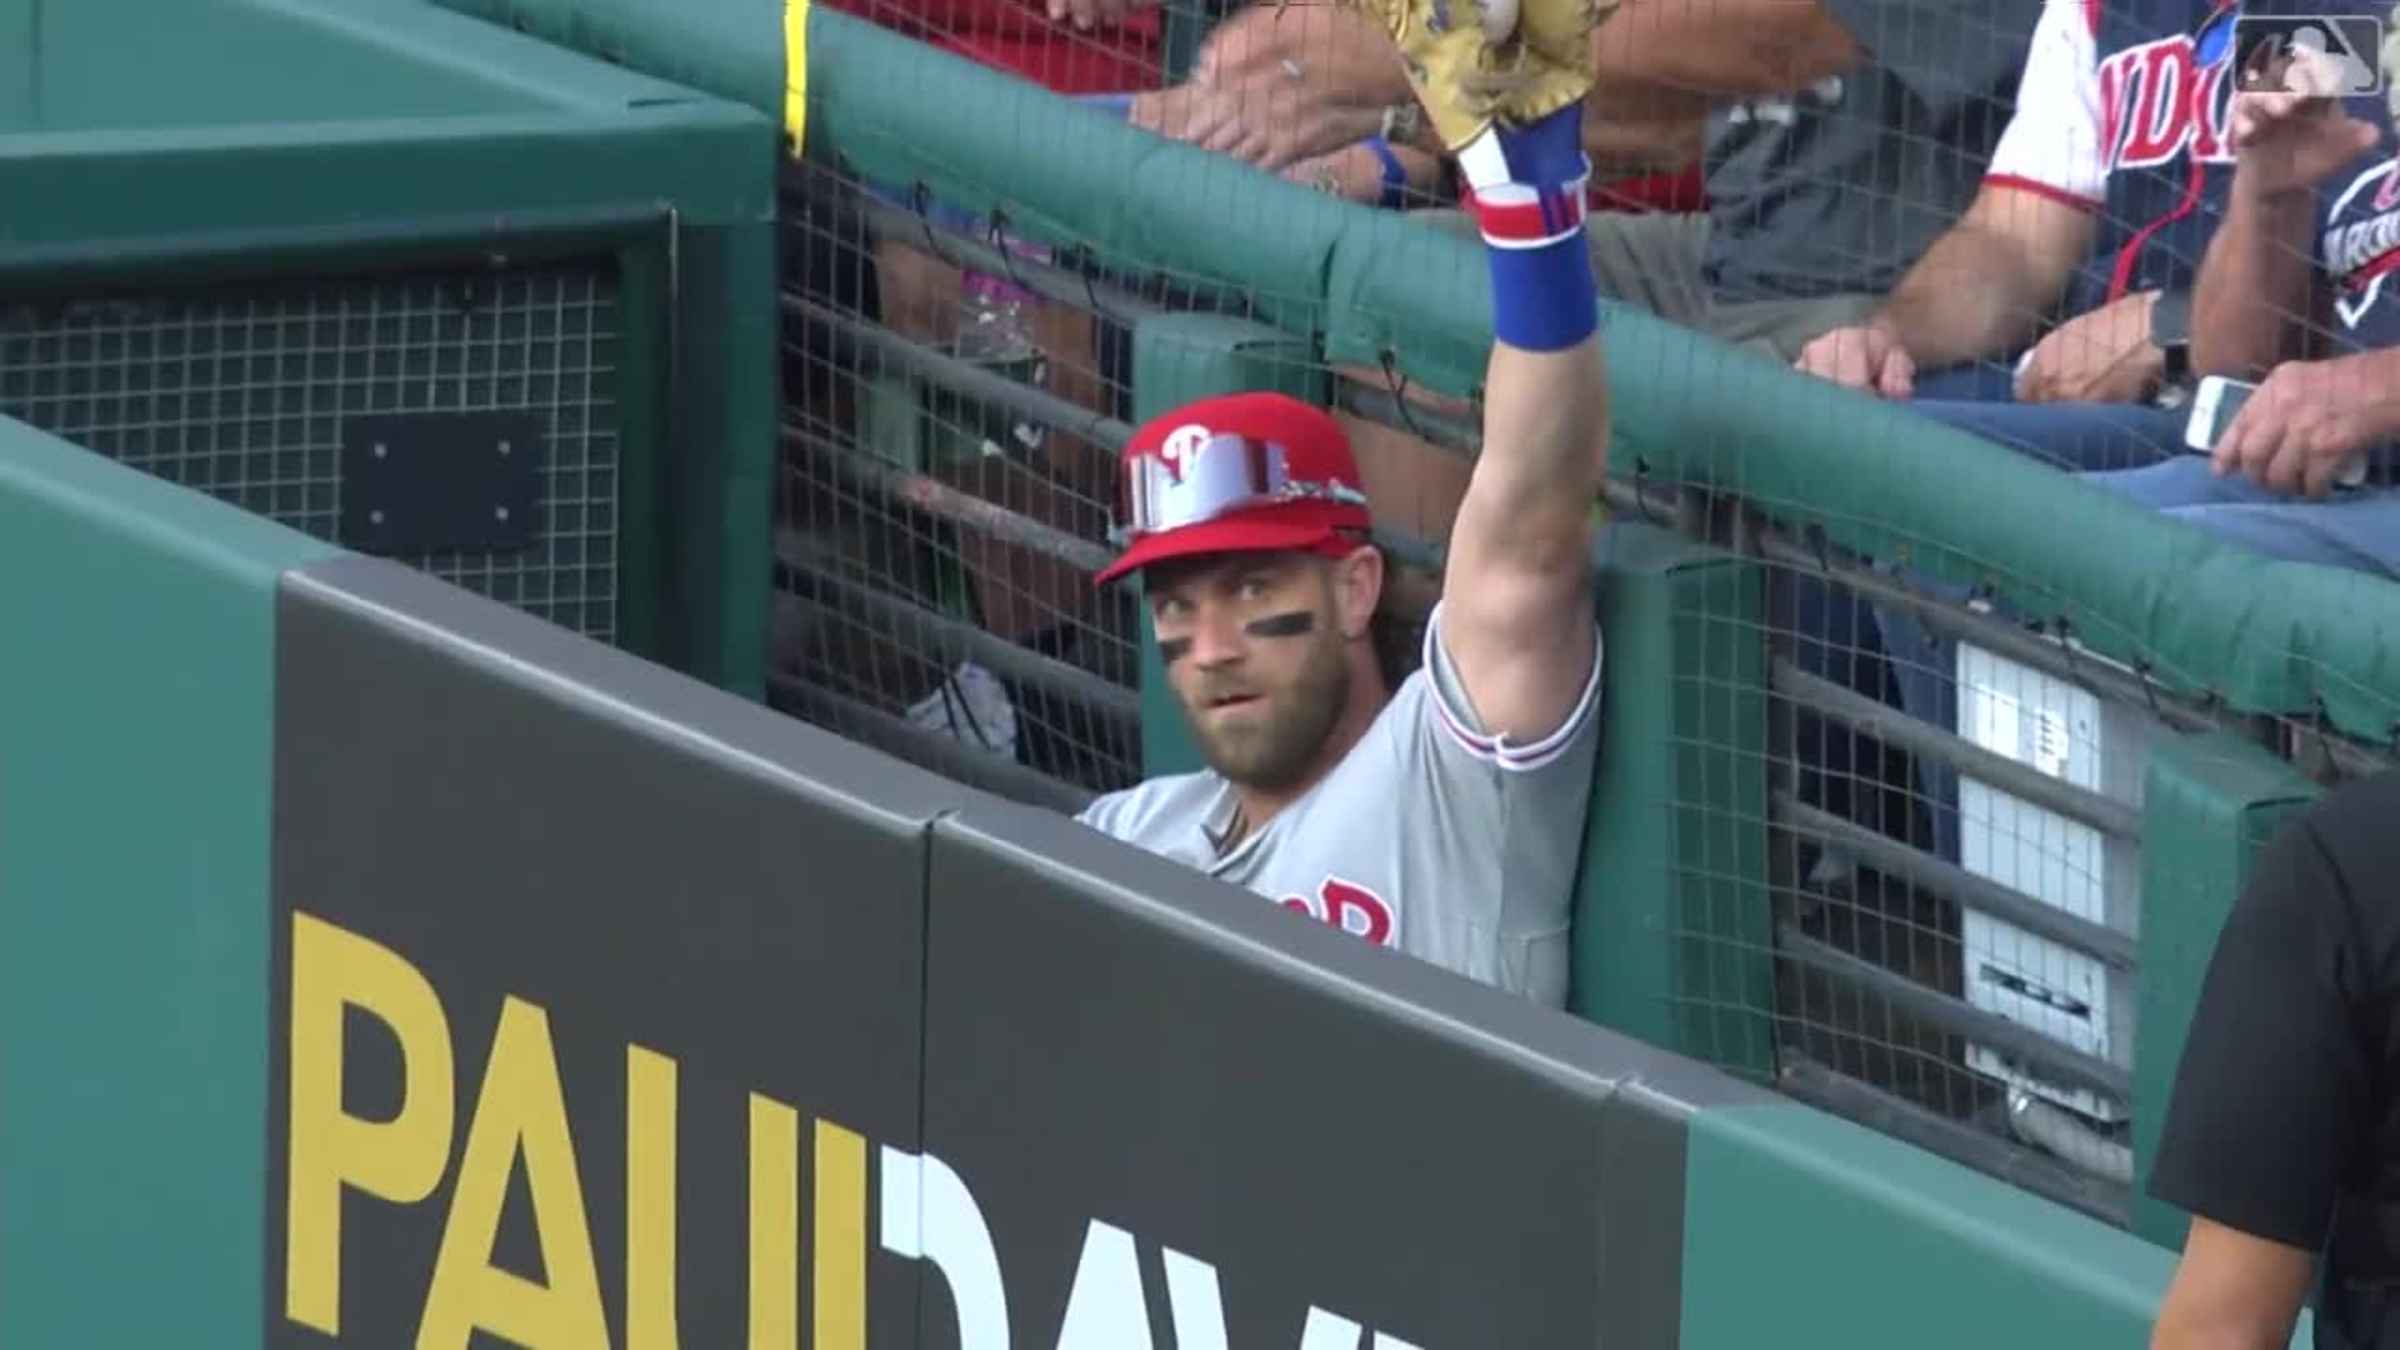 Phillies star Bryce Harper makes catch tumbling into photo pit in